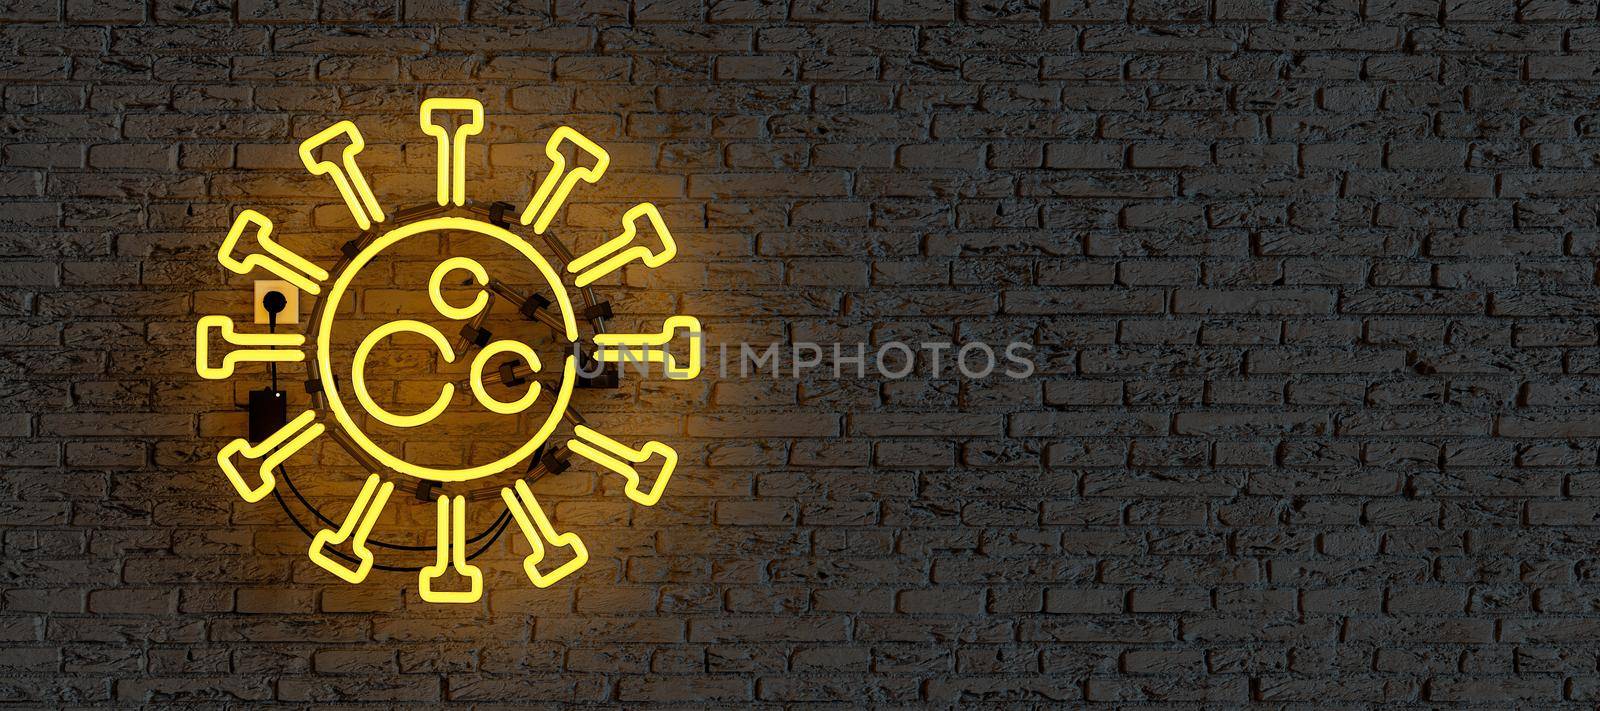 neon with COVID logo illuminated on brick wall with copyspace. 3d rendering